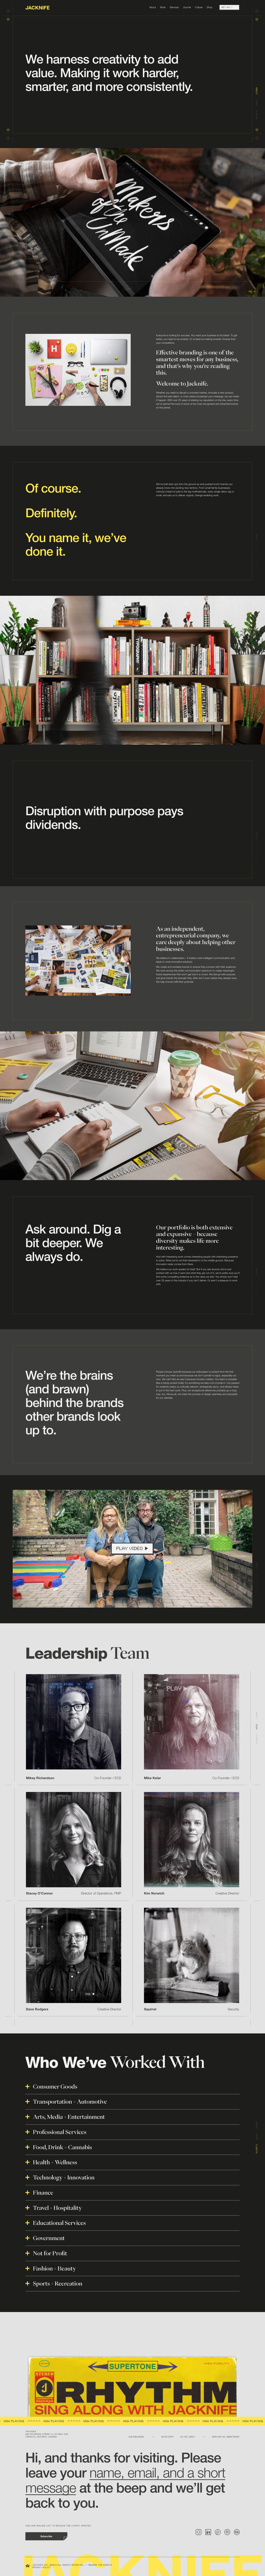 Jacknife Design Landing Page Example: Jacknife is a full-service branding and design agency in Toronto. We're experts in creating brand strategies, identity design & digital experiences. 